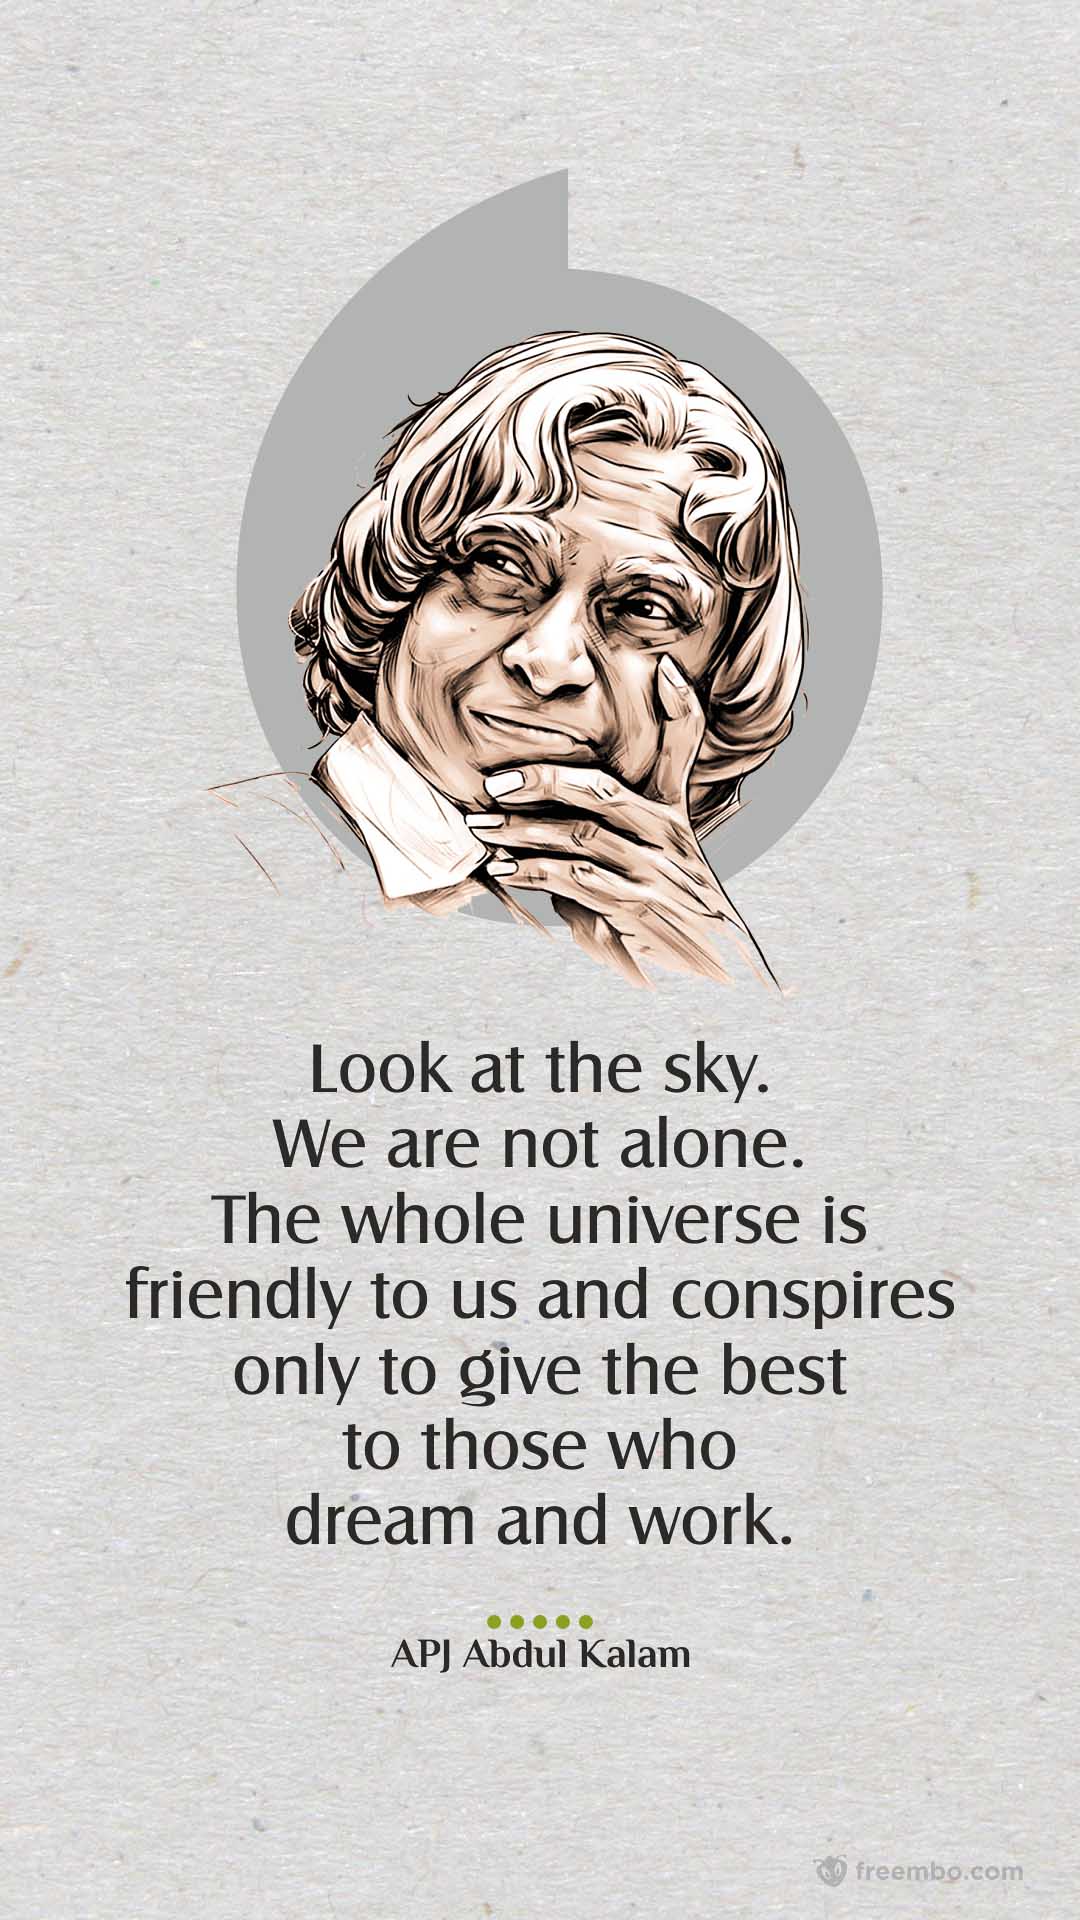 Abdul Kalam Quotes with texture background and abdul kalam painting image in top